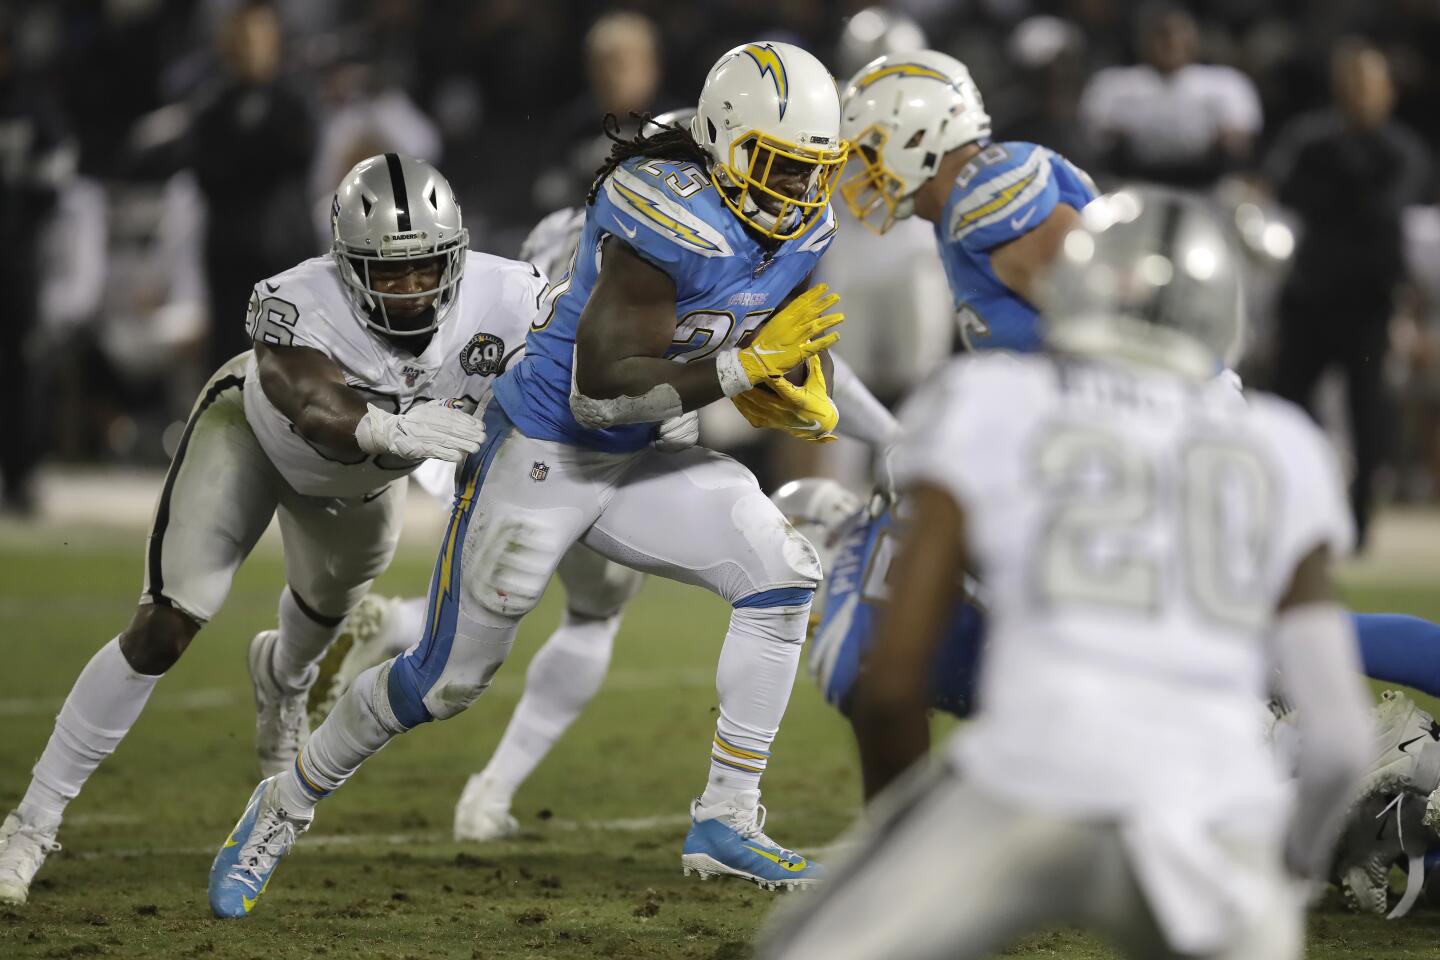 Chargers running back Melvin Gordon carries the ball against the Raiders during the first half of a game Nov. 7 at RingCentral Coliseum.